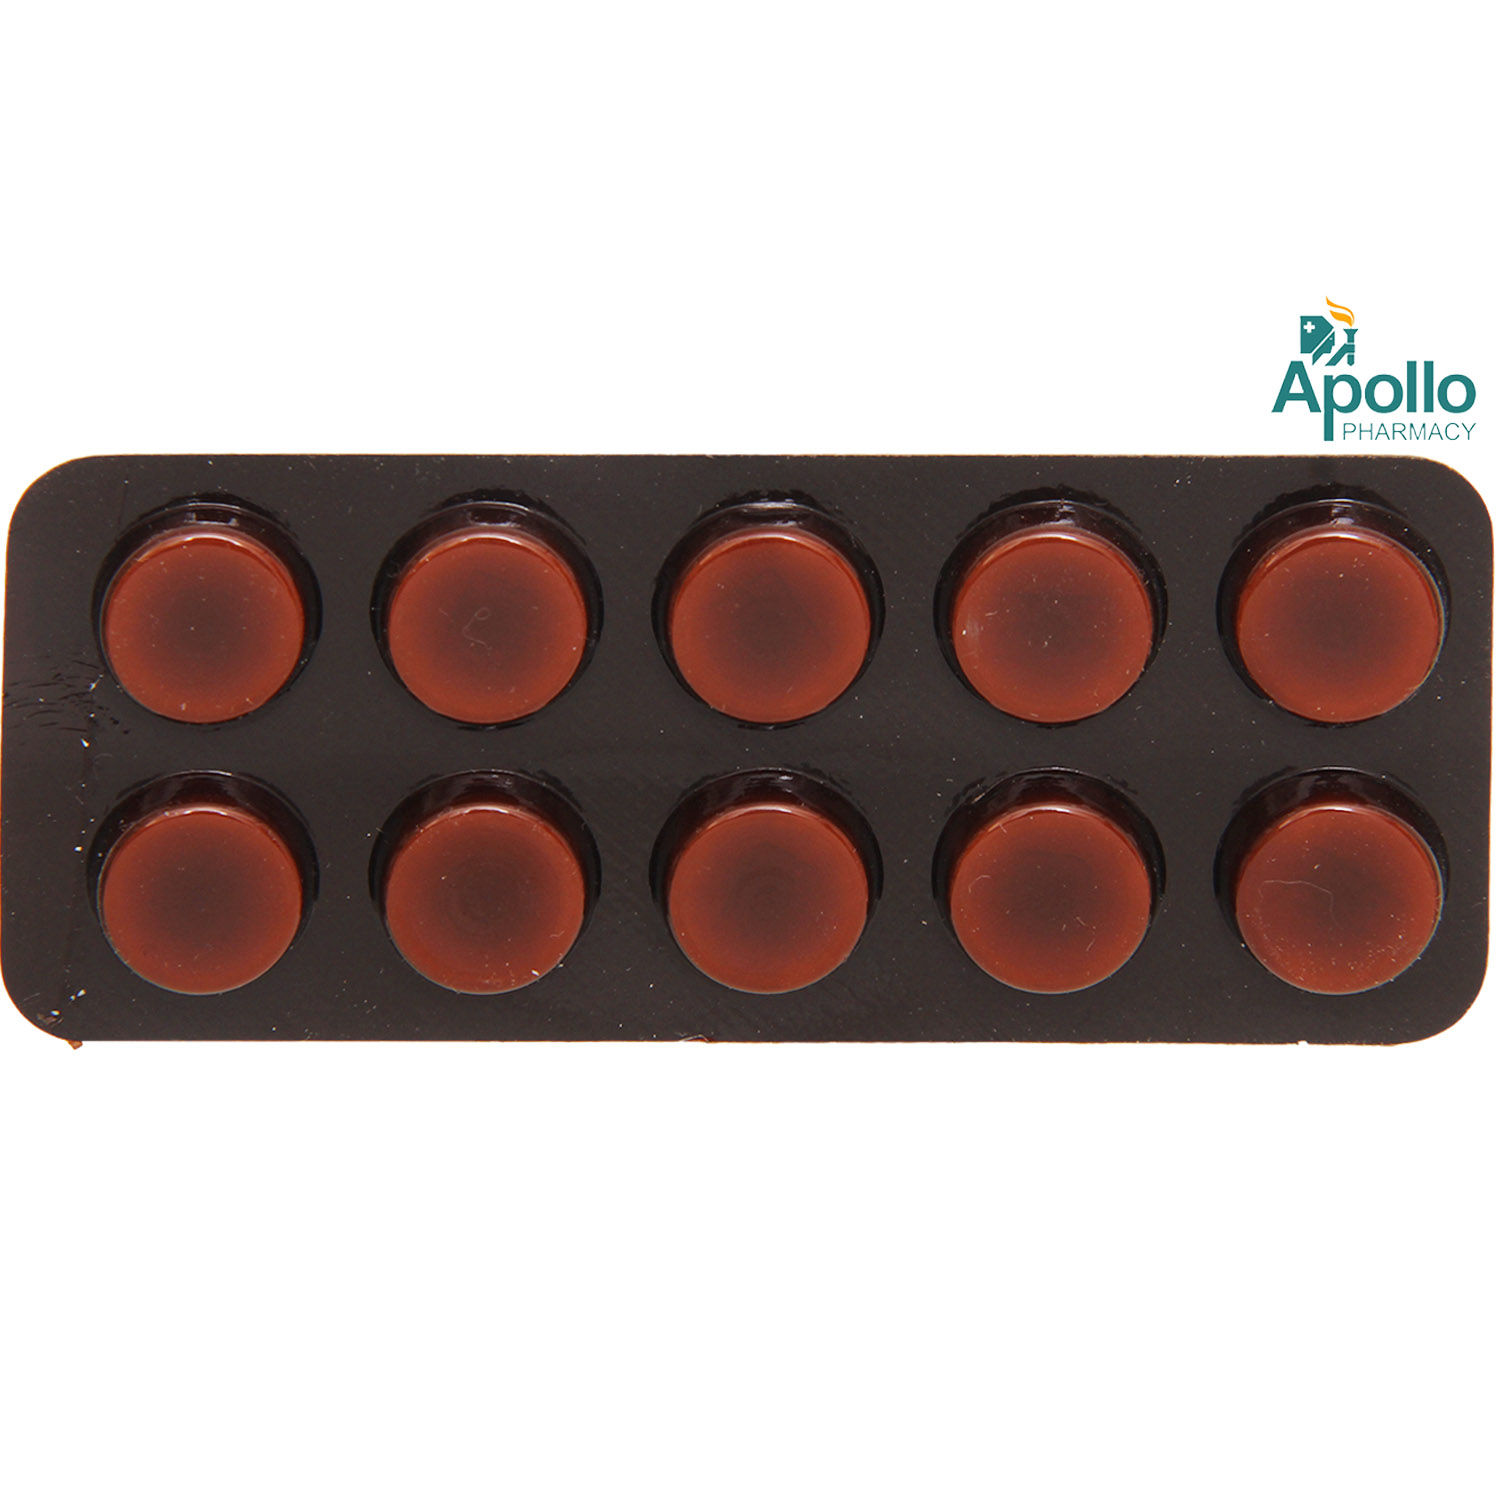 TUSCOLD TABLET 10'S, Pack of 10 TABLETS